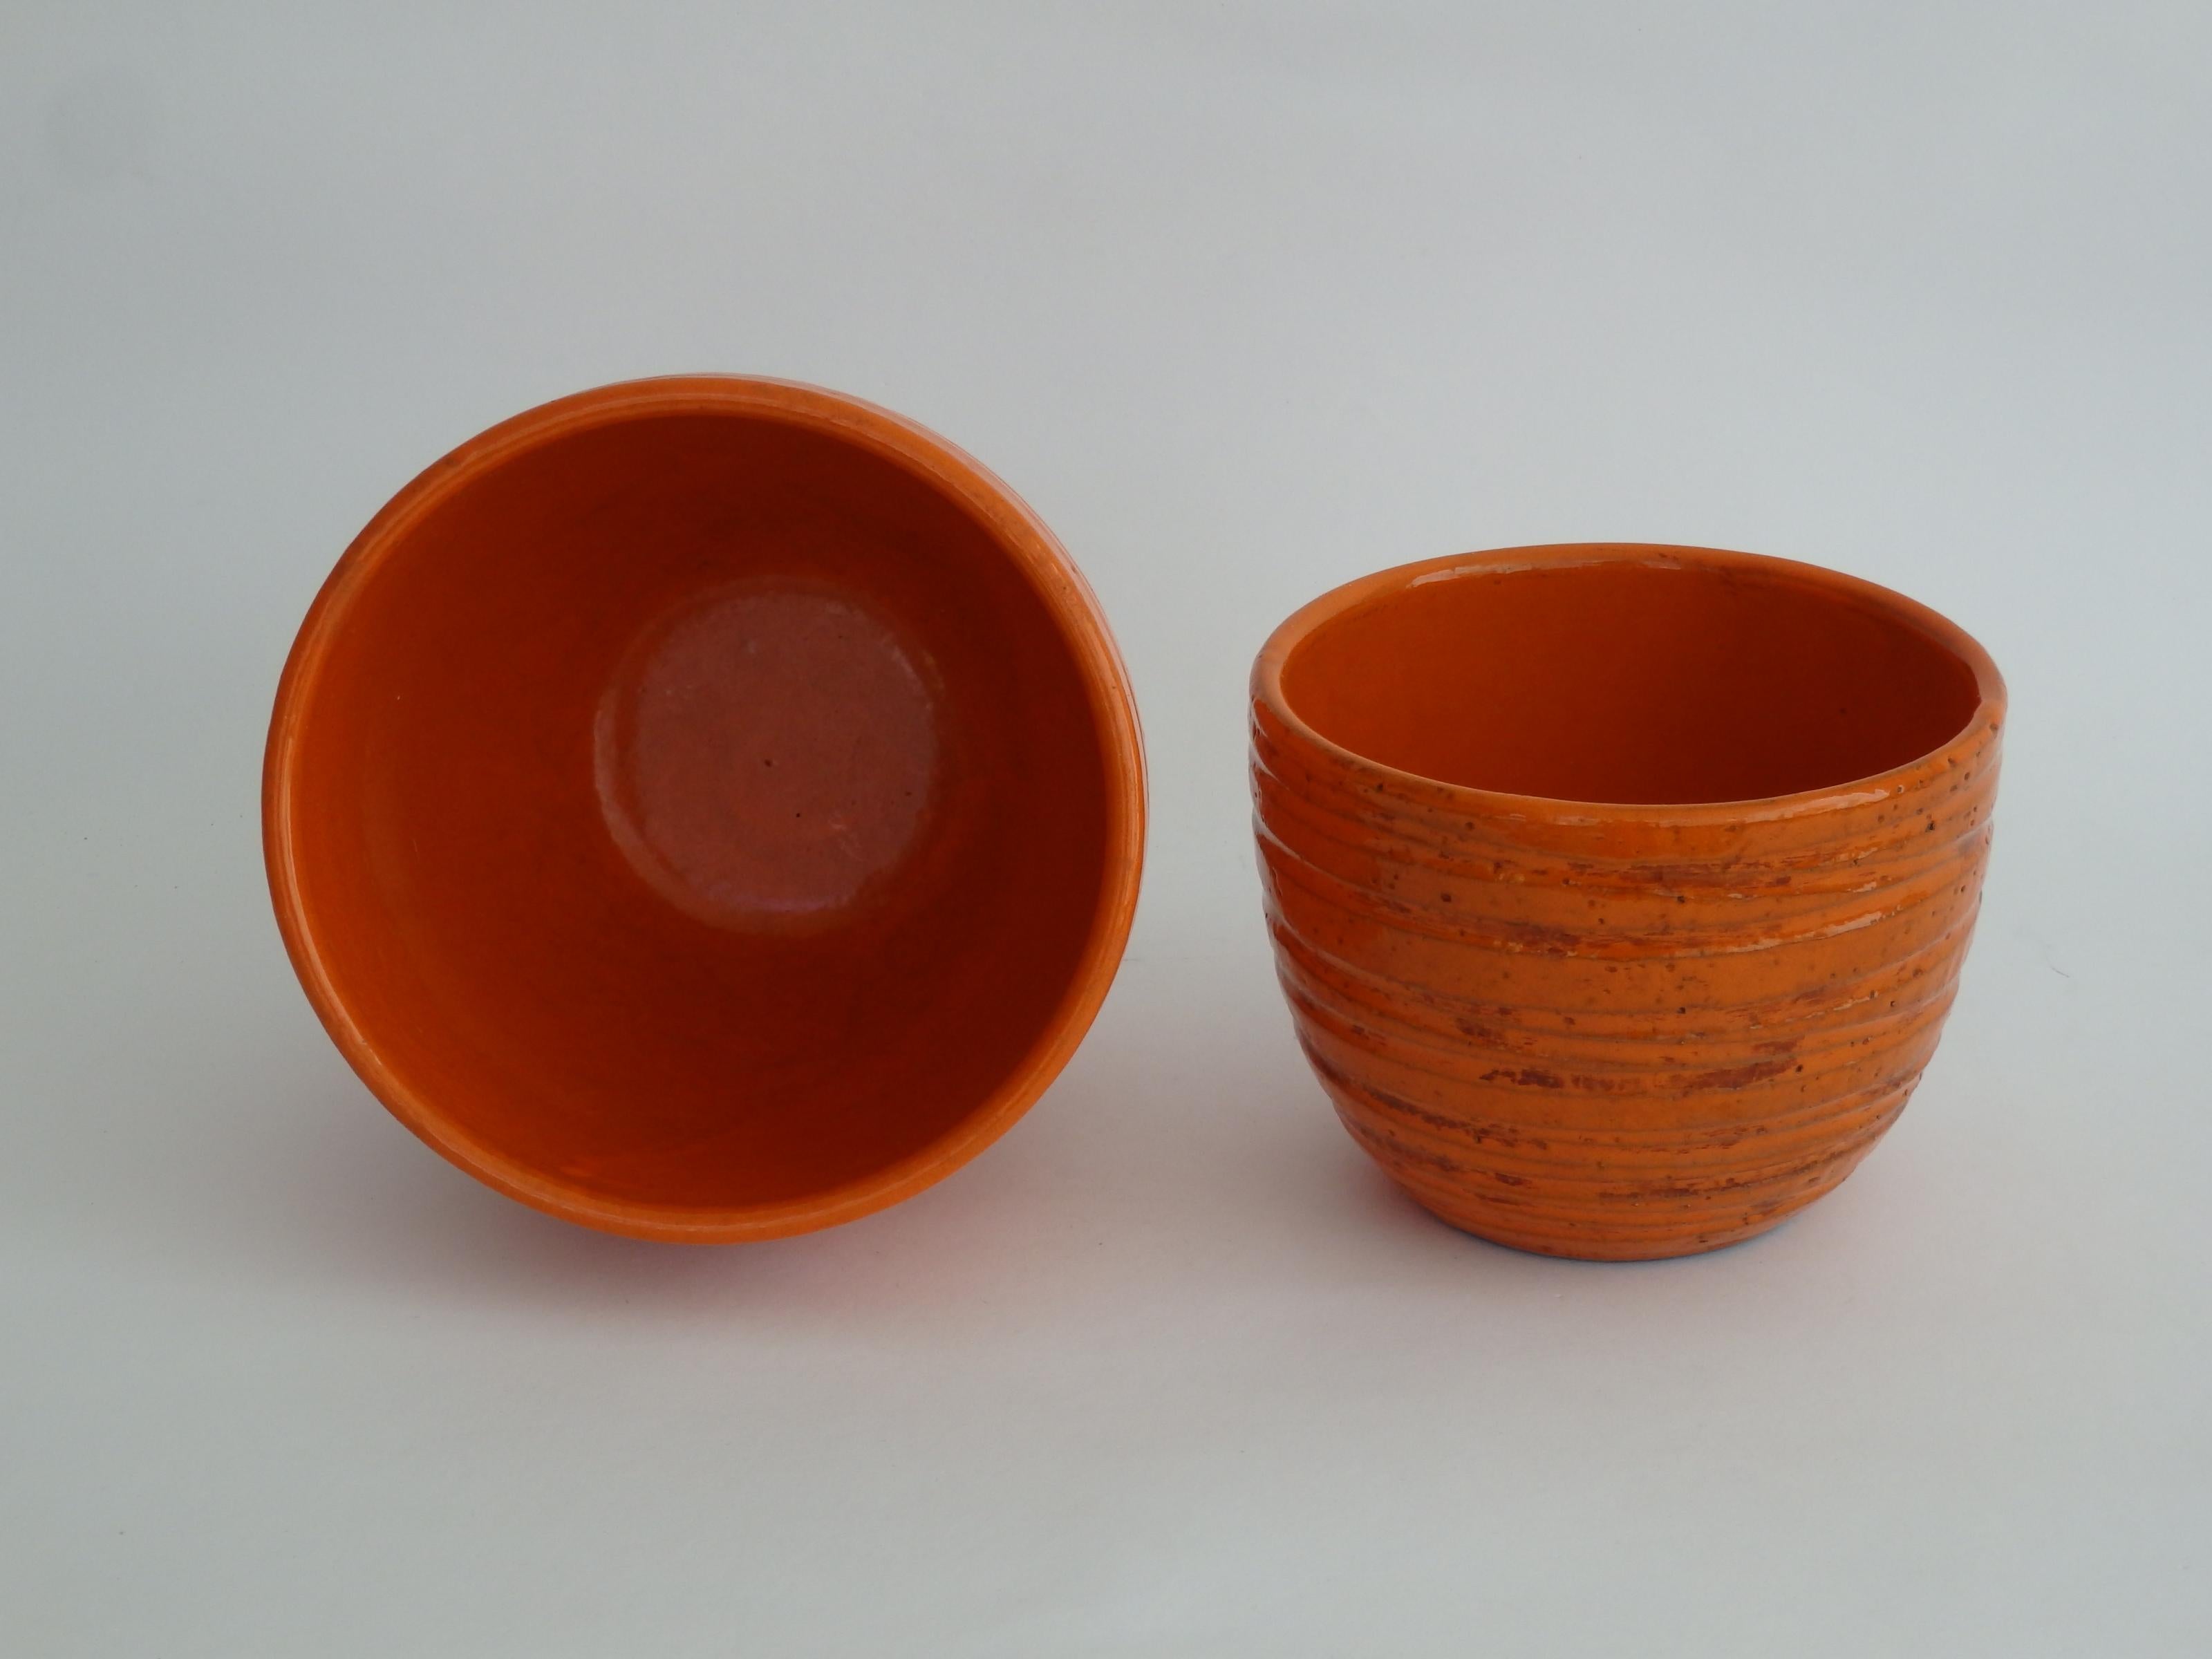 Pair of fire orange ribbed planter pots from Bitossi's Pietra (Stone) decor series. Attributed to Aldo Londi, by way of Rosenthal Netter. Paper labels intact on undersides.
Smaller pot measures: 4.5